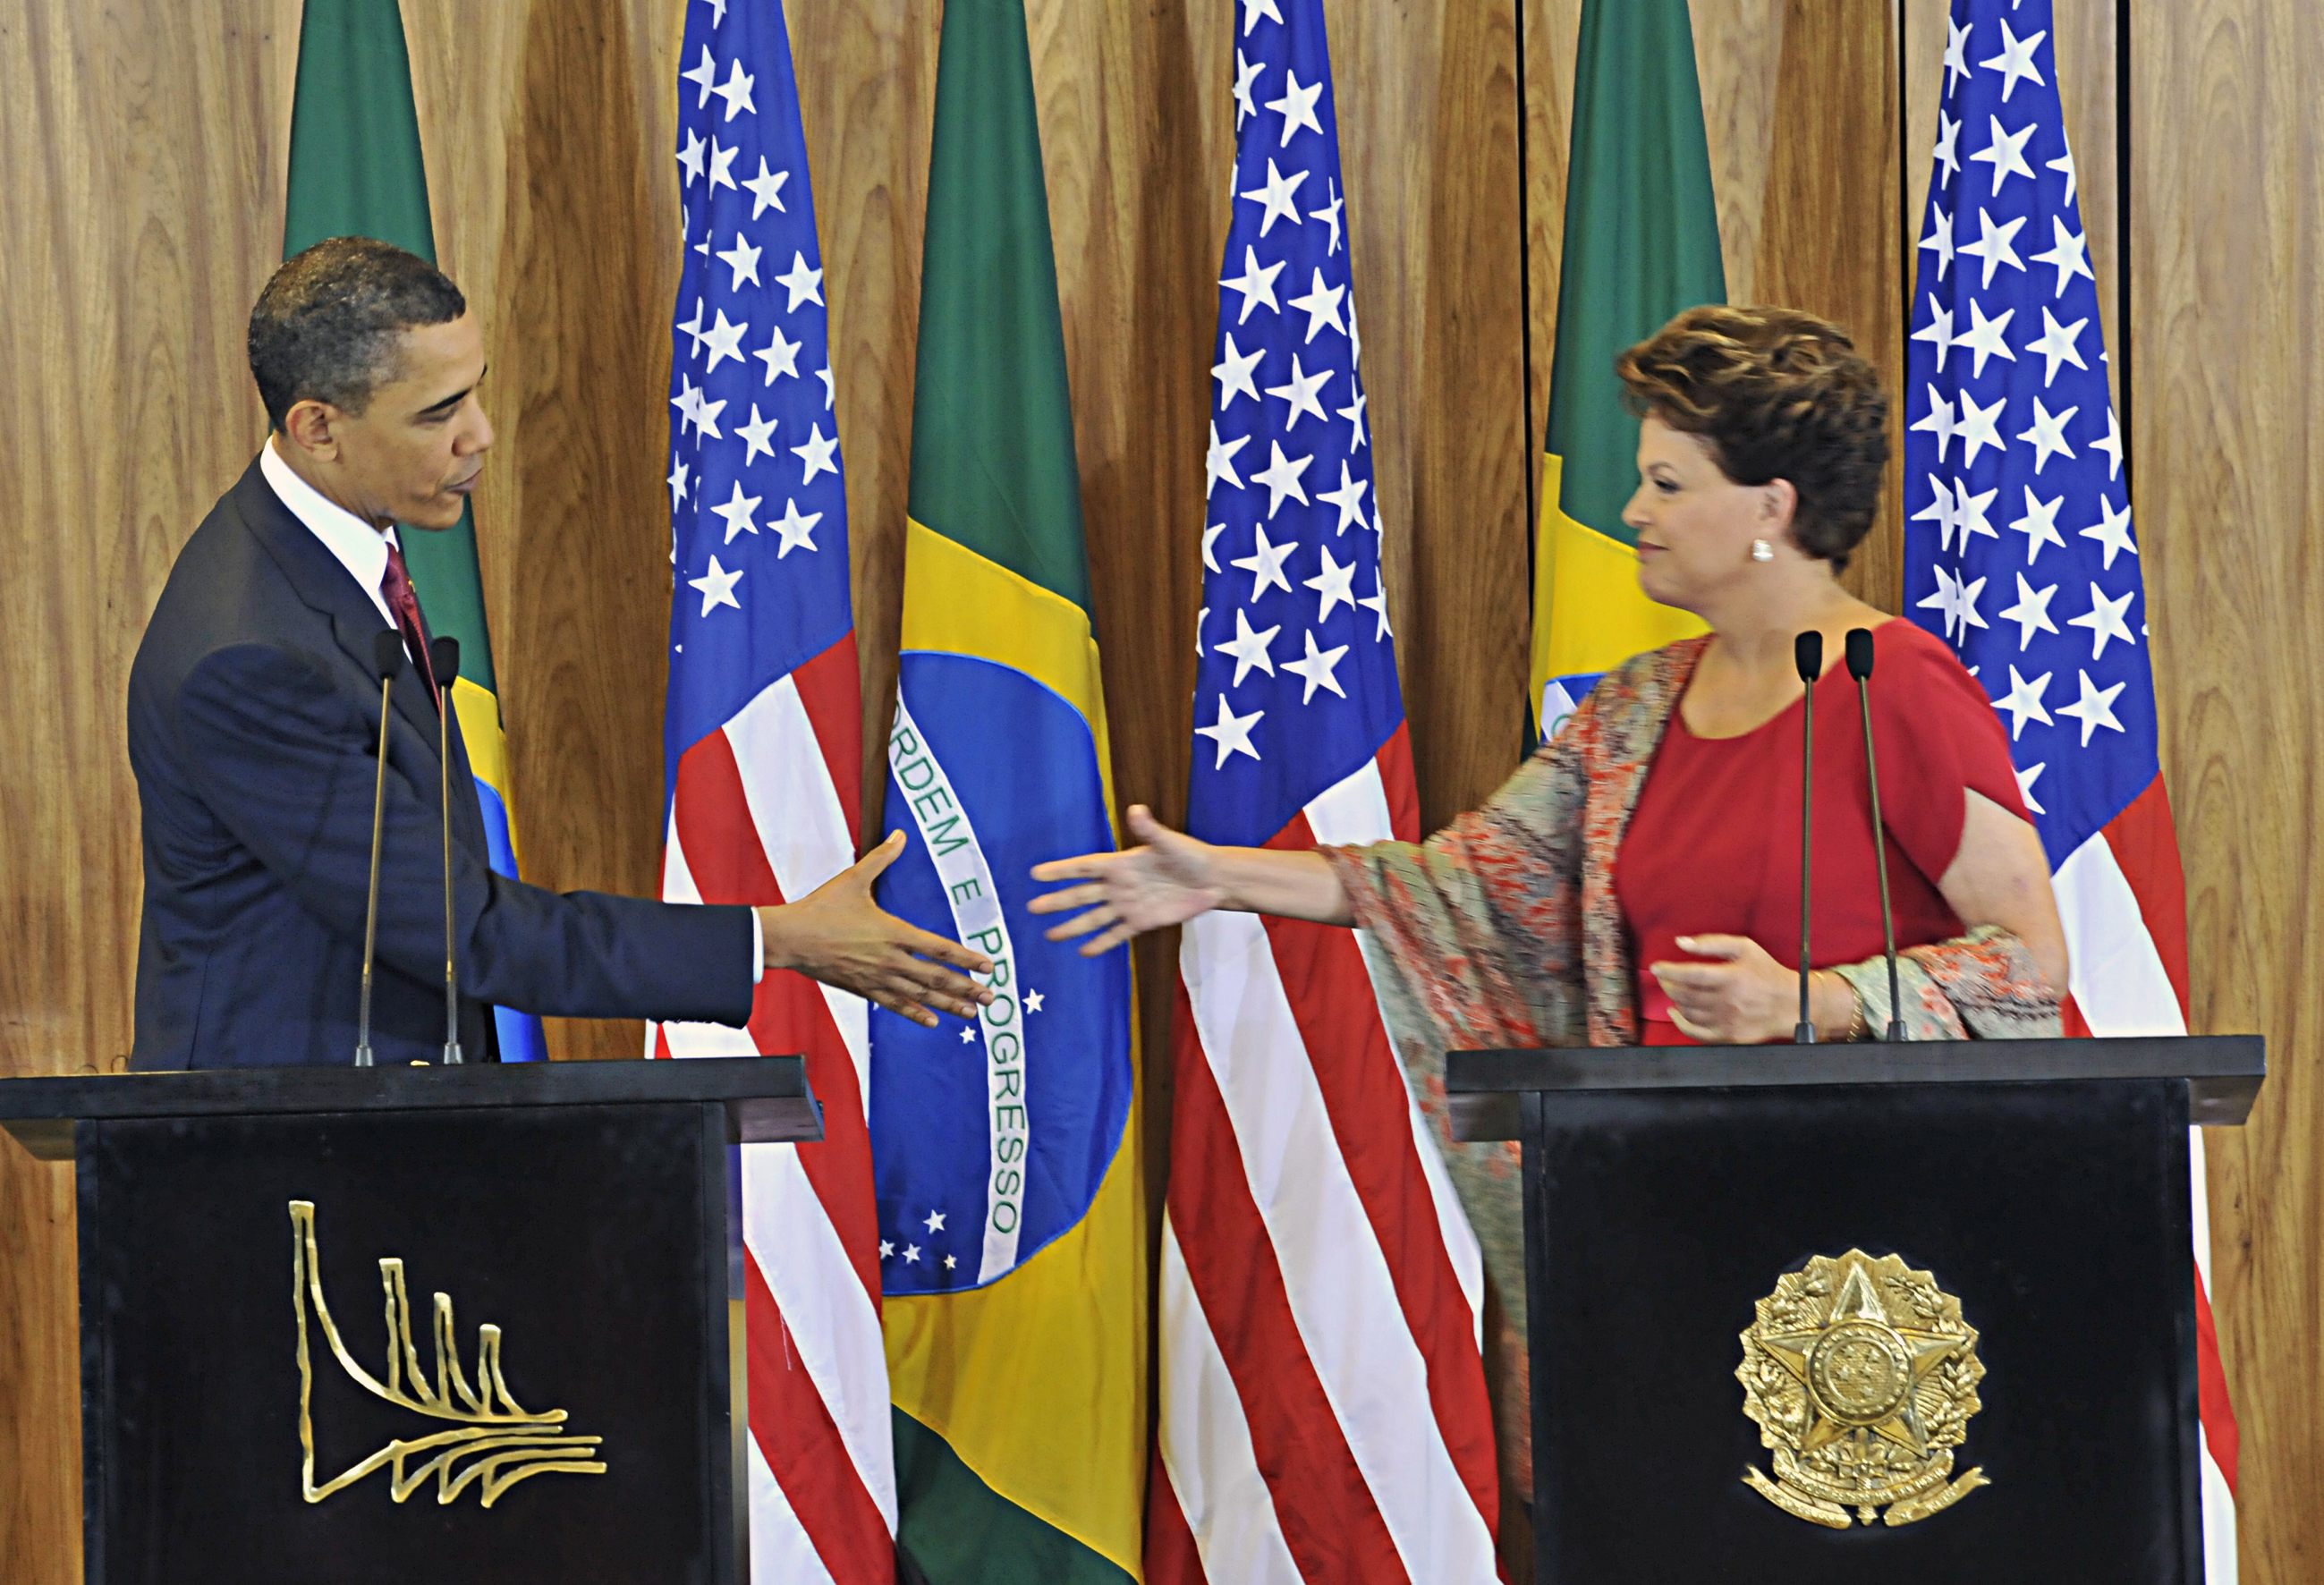 In March 2011, American president Obama travelled to Brazil to met with president Dilma Rousseff, Brazil News